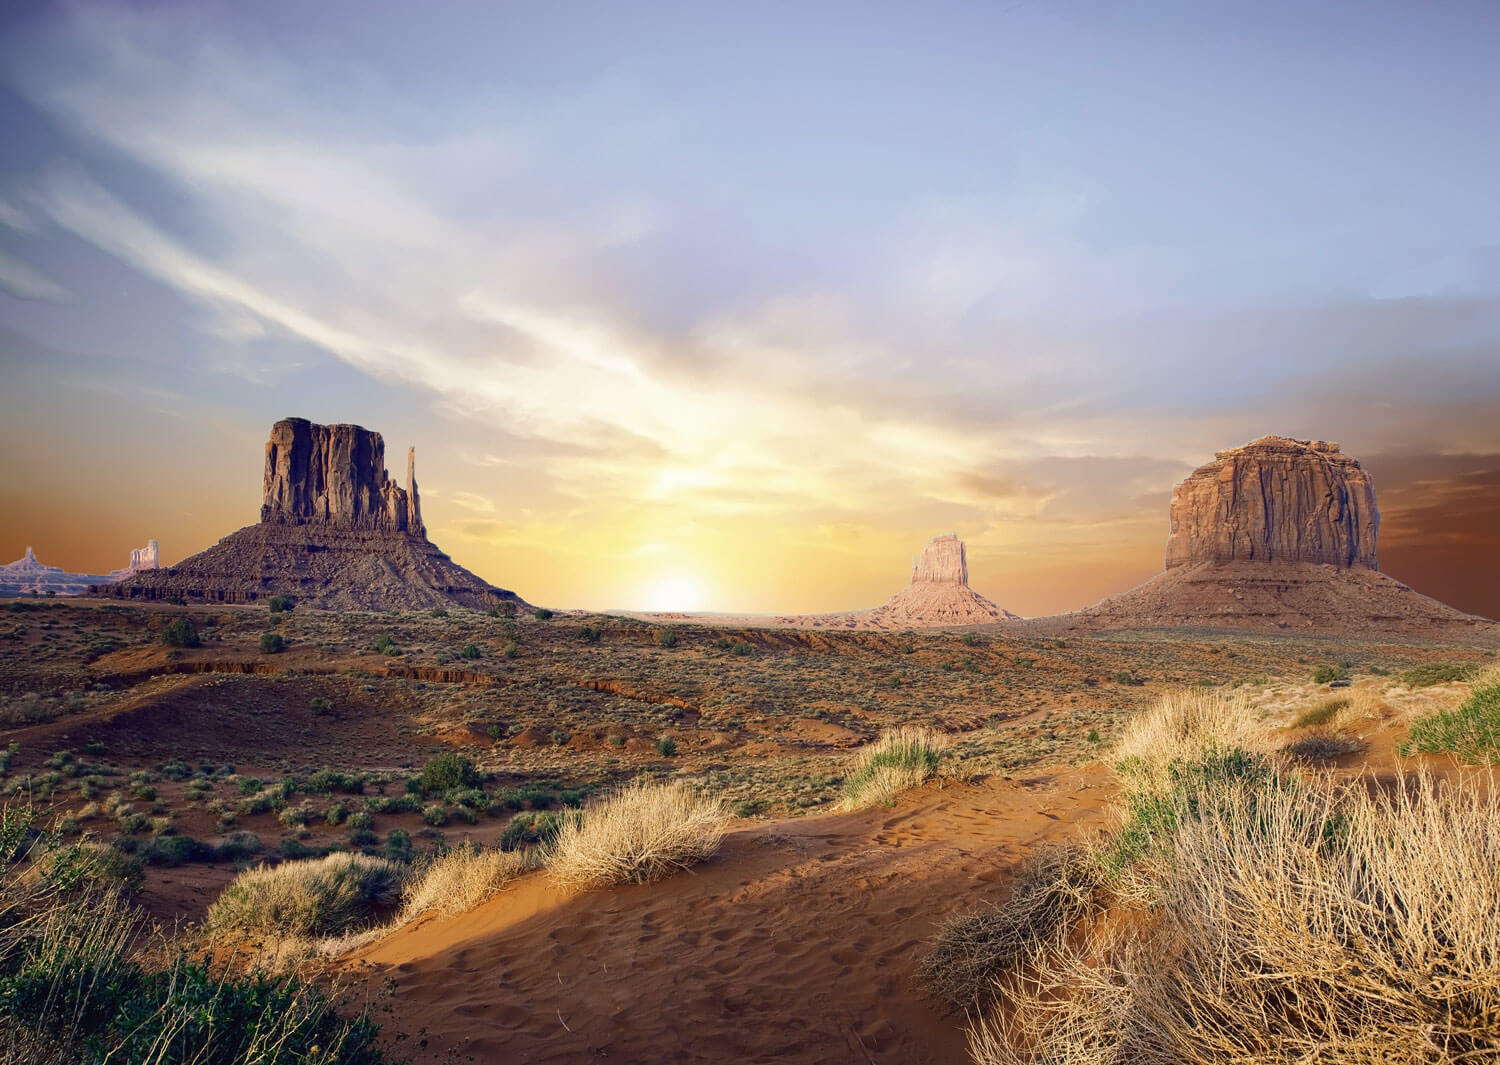 A desert landscape in Monument Valley at sunset. The buttes in the background are silhouettes against a colorful sky.